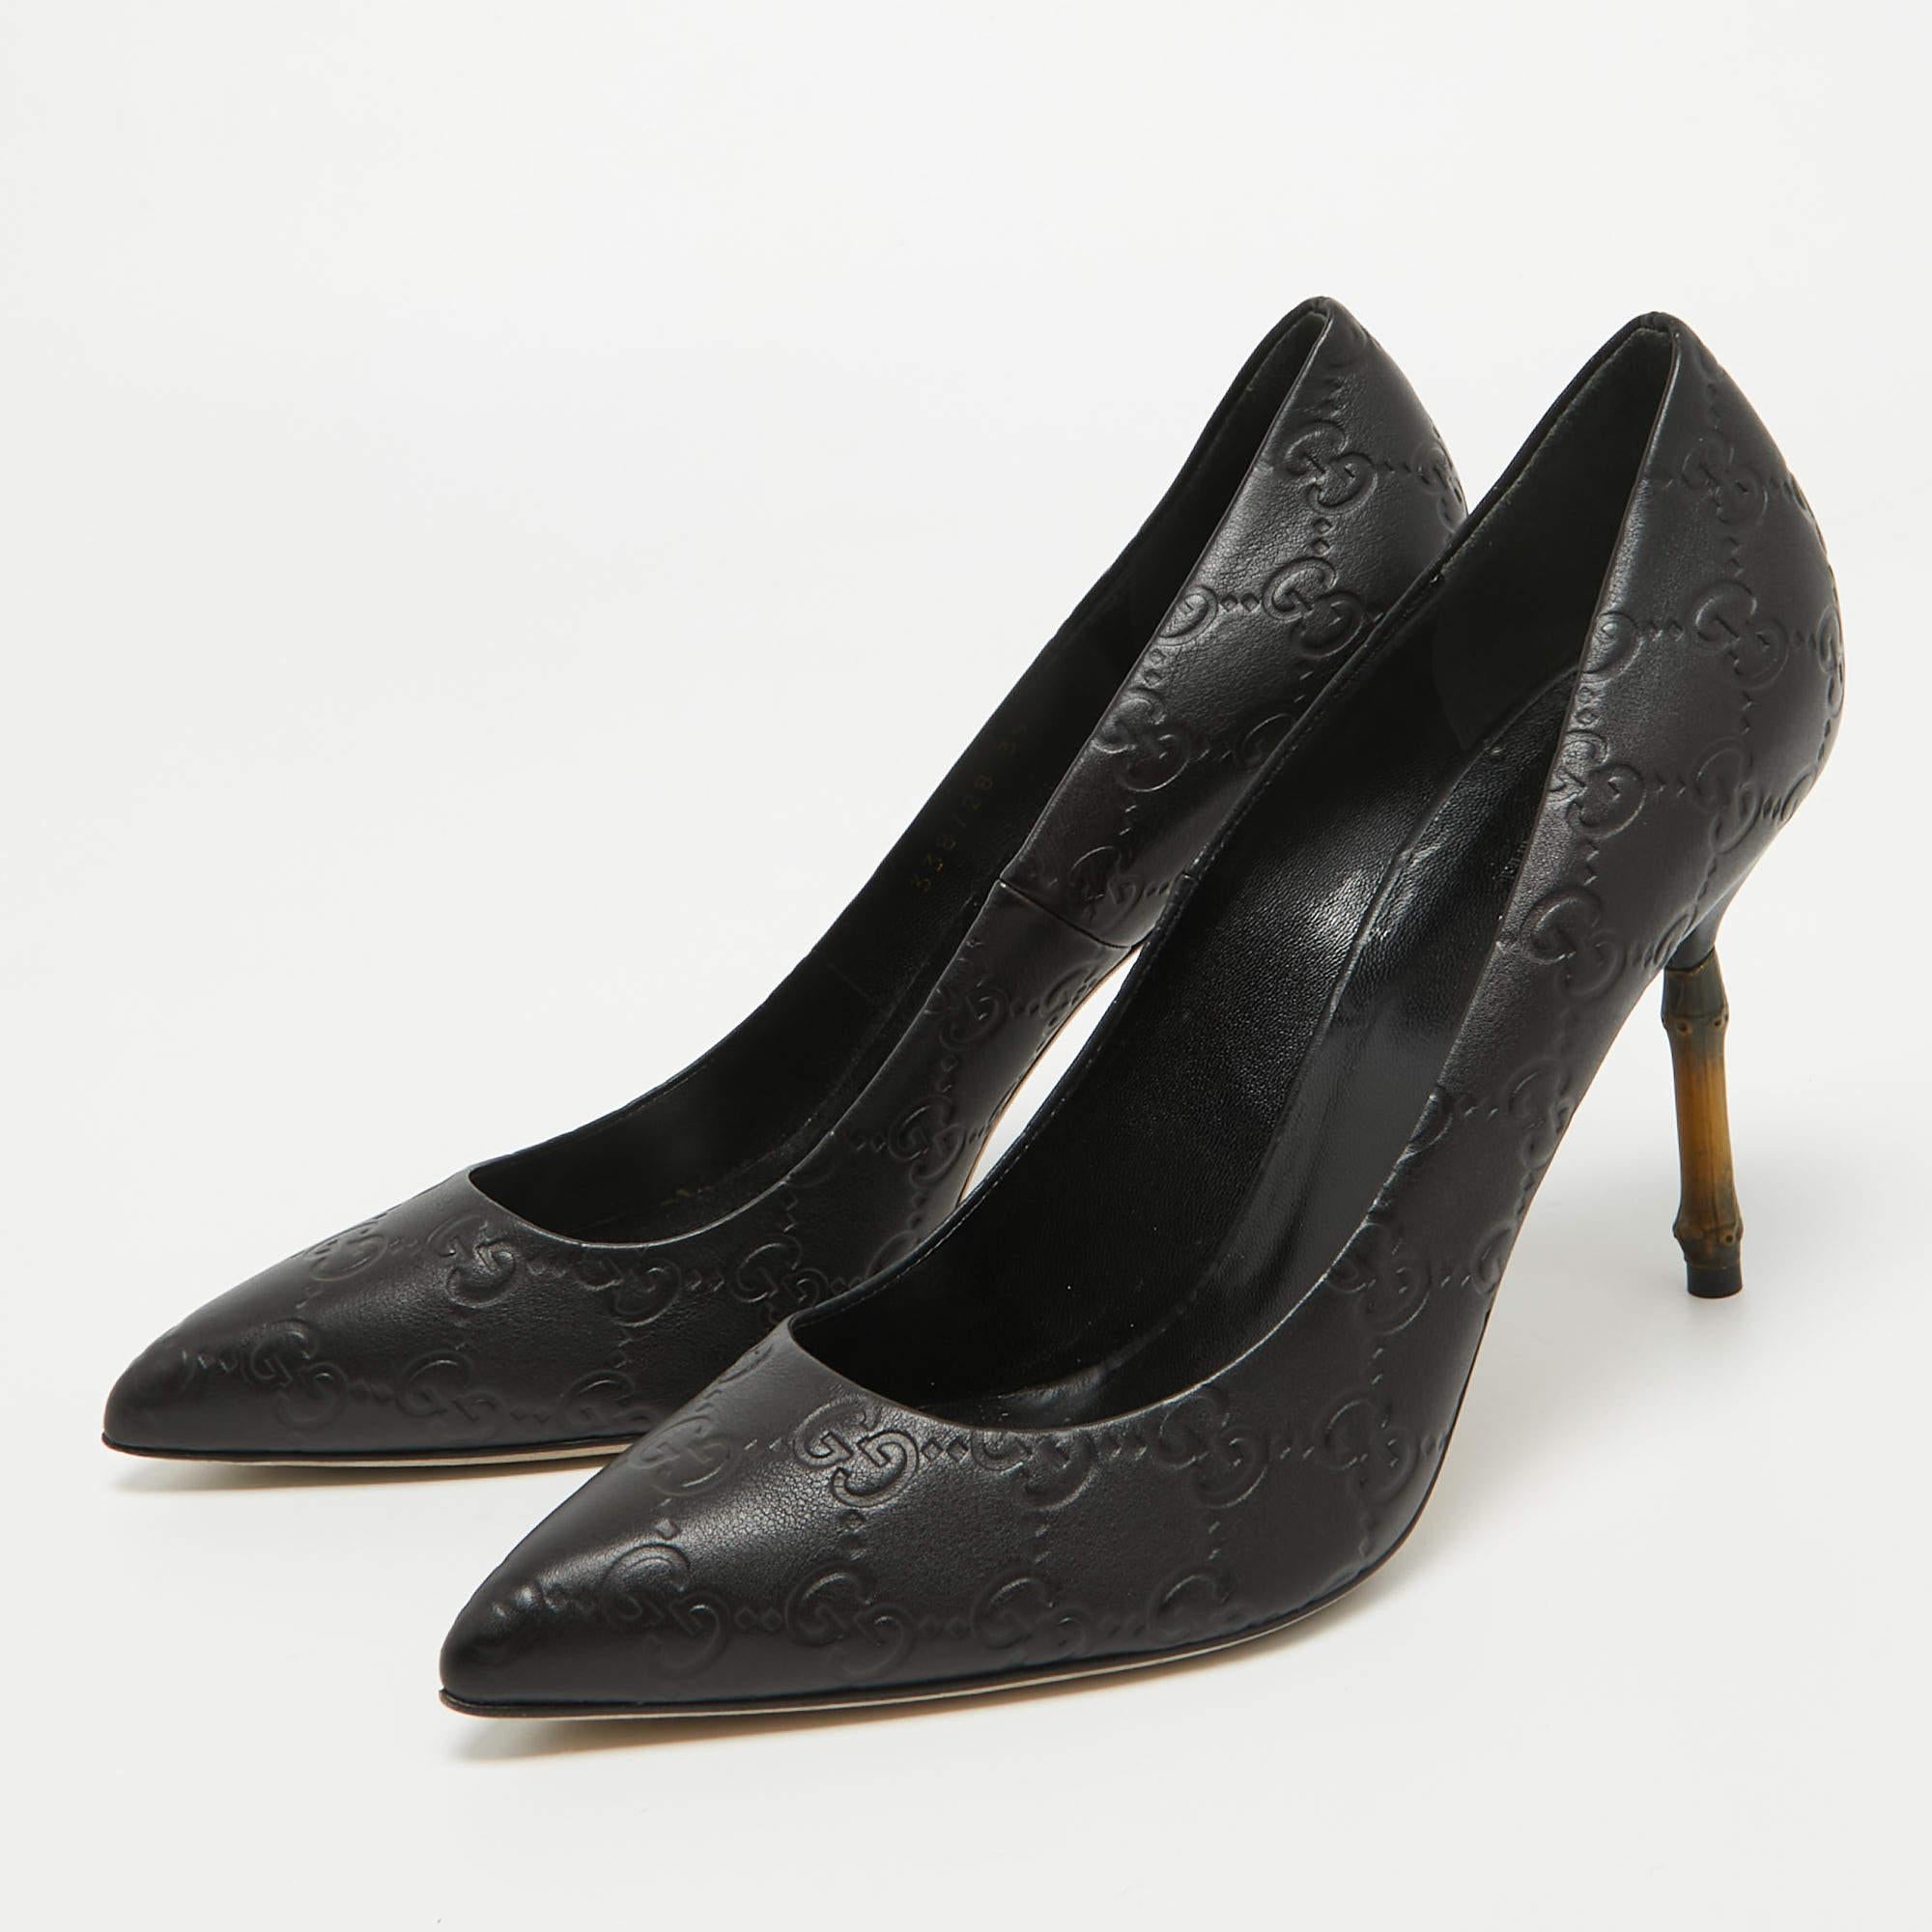 Gucci Black Guccissima Leather Kristen Bamboo Heel Pumps Size 39 For Sale 4